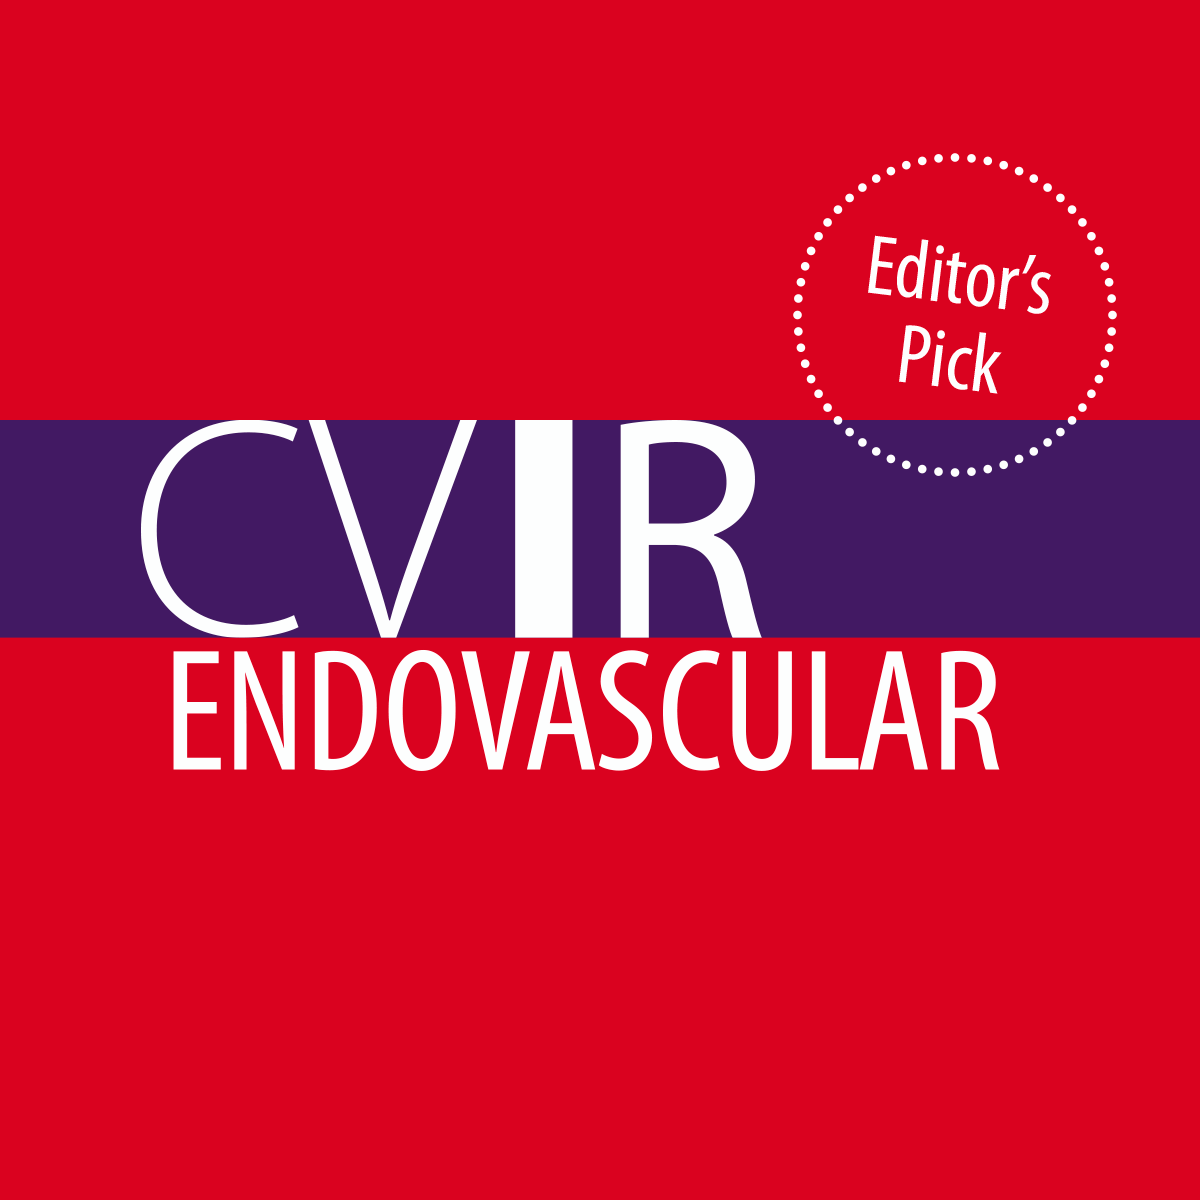 Editor's Pick!
This paper opens new pathways to treat patients safely. For #embolisation procedures, also in oncology, radial access is an important step to increase quality of care & reducing costs: cvirendovasc.springeropen.com/articles/10.11… 
#openaccess #uterinefibroids